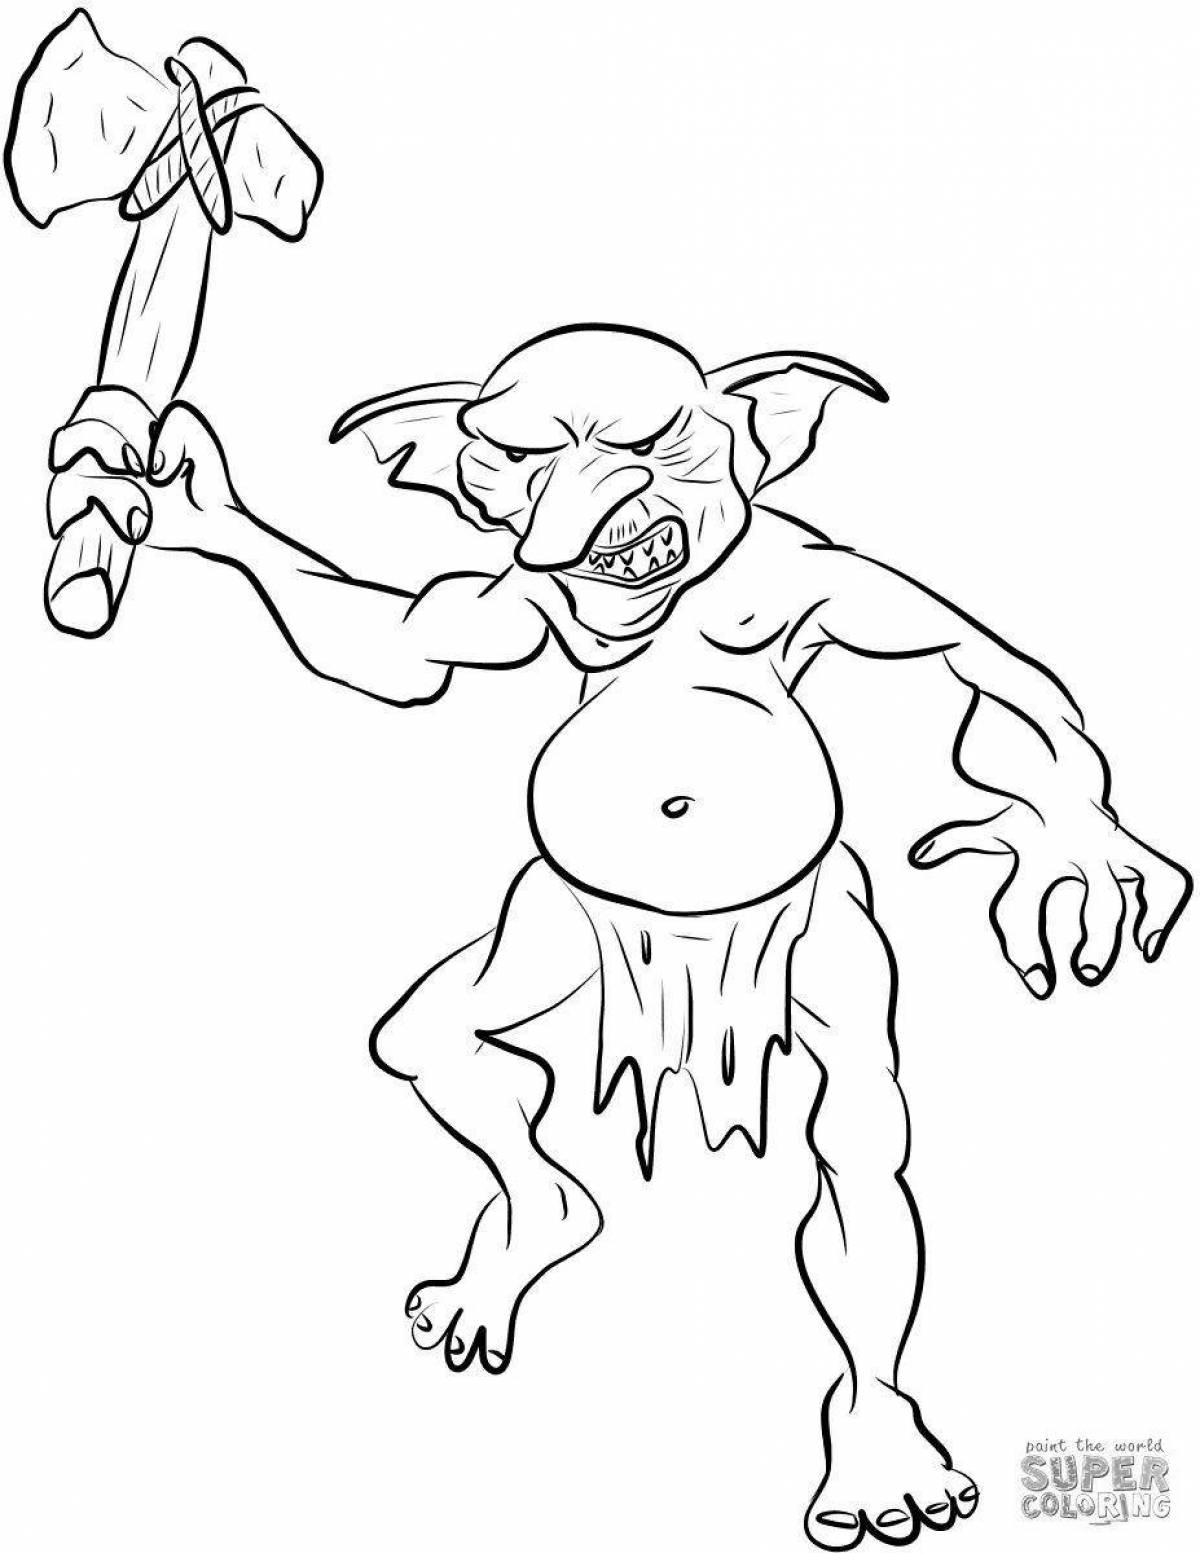 Colorful goblin core coloring page